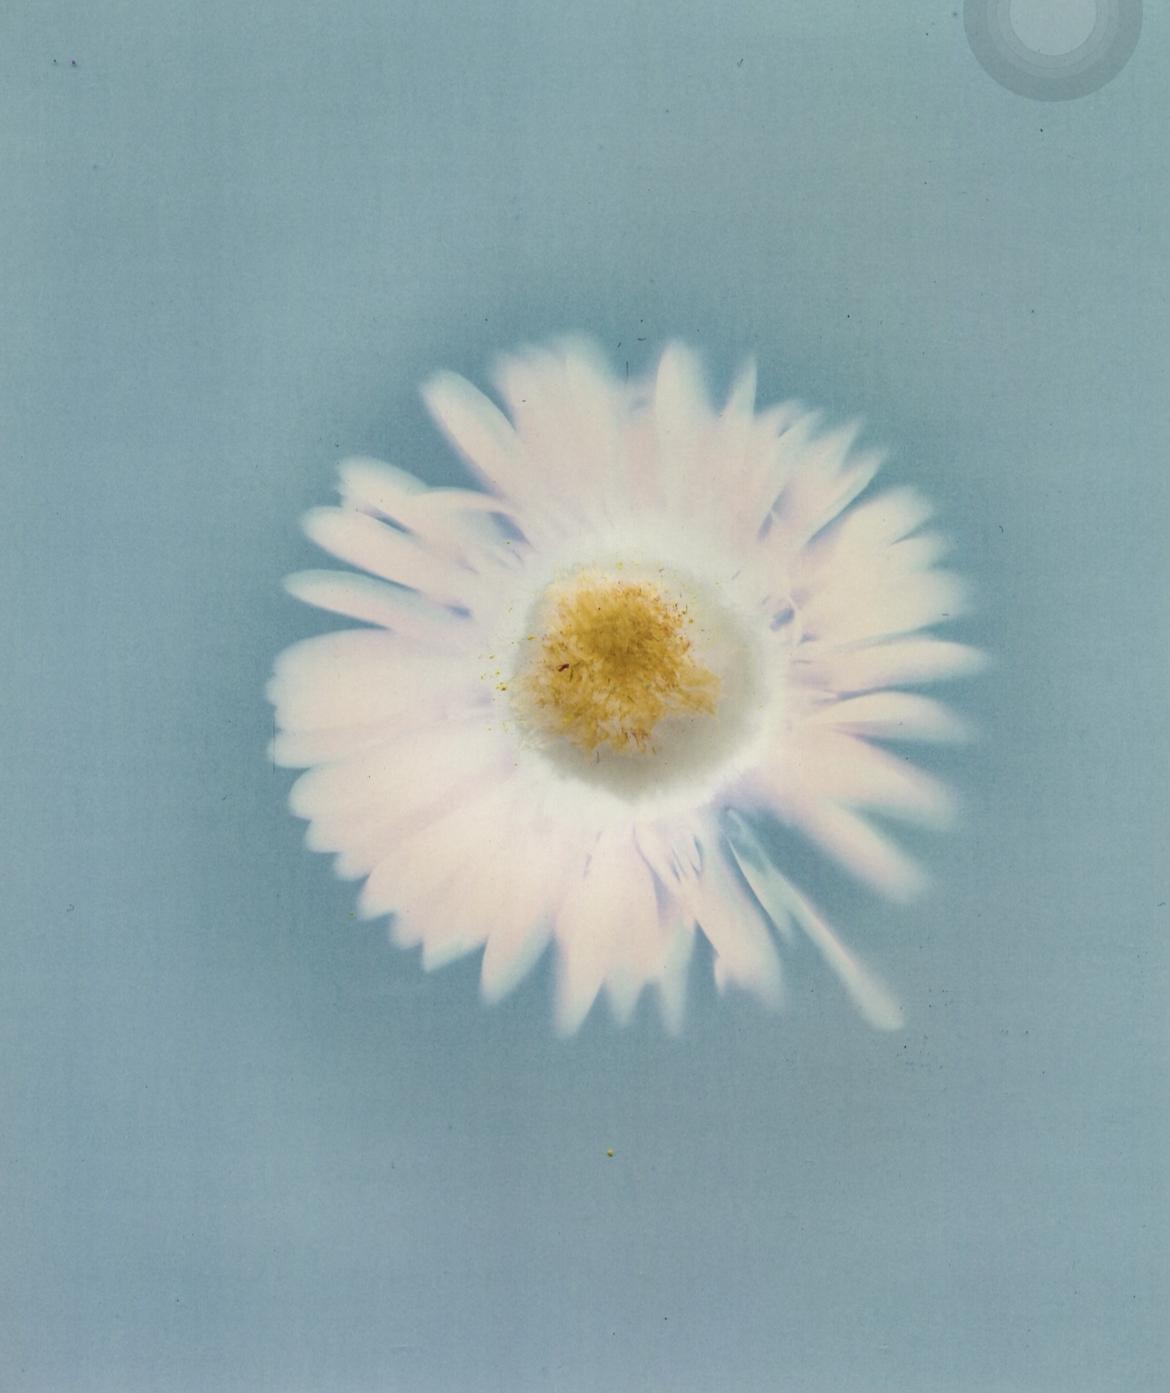 A flower with white petals on a blue background